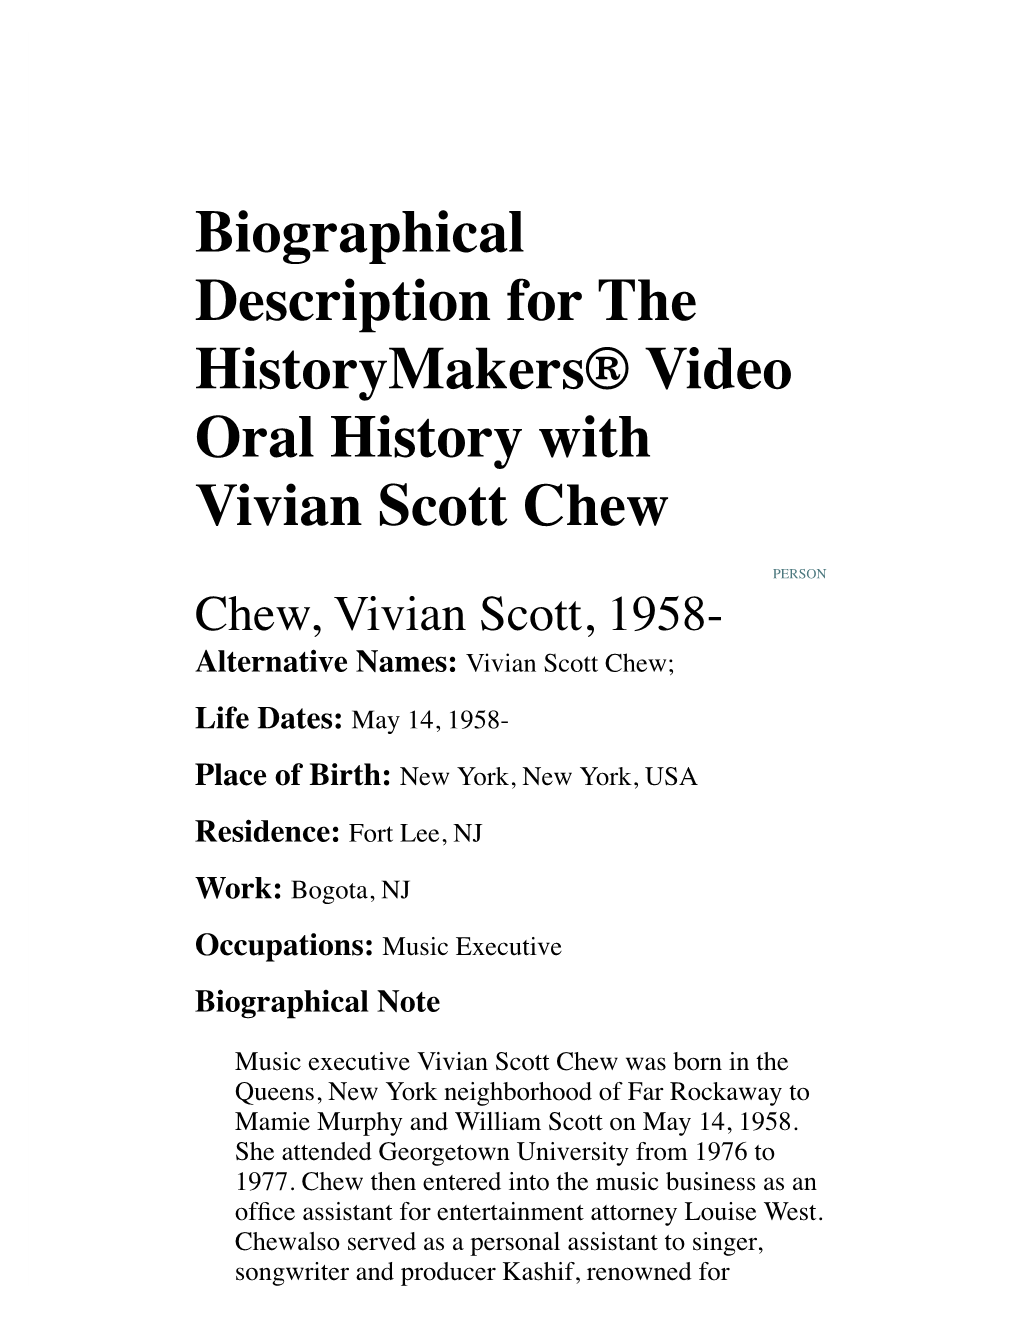 Biographical Description for the Historymakers® Video Oral History with Vivian Scott Chew